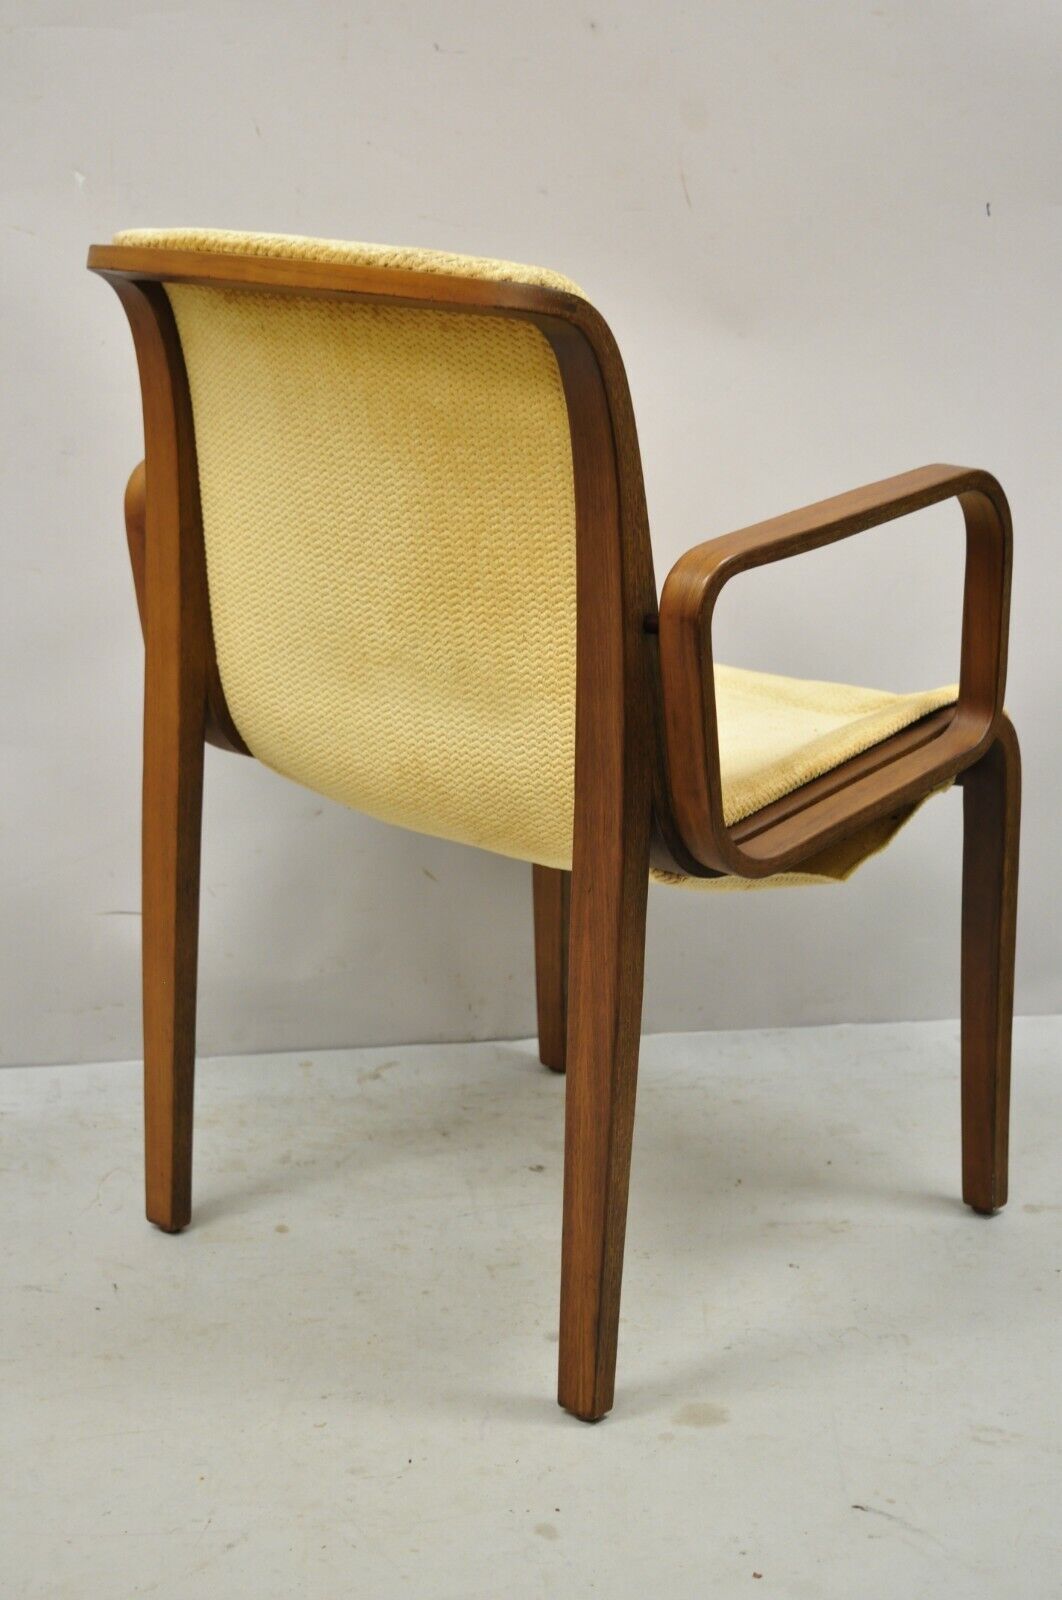 Knoll Bill Stephens Mid Century Modern Bentwood Upholstered Dining Arm Chair